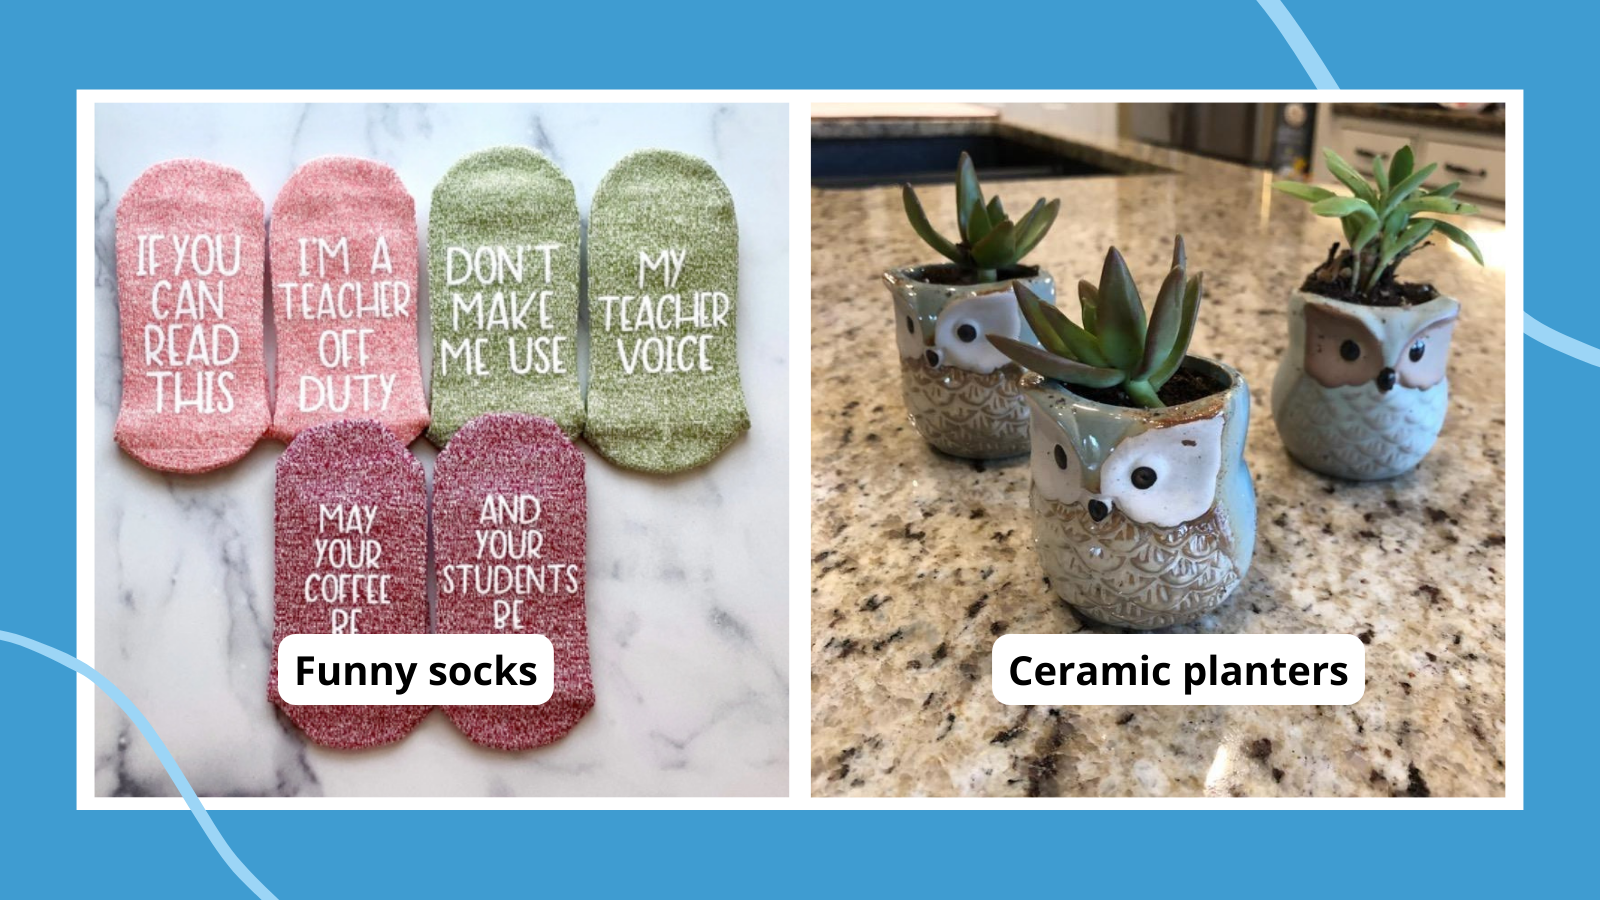 socks and ceramic planters for coworker gift ideas